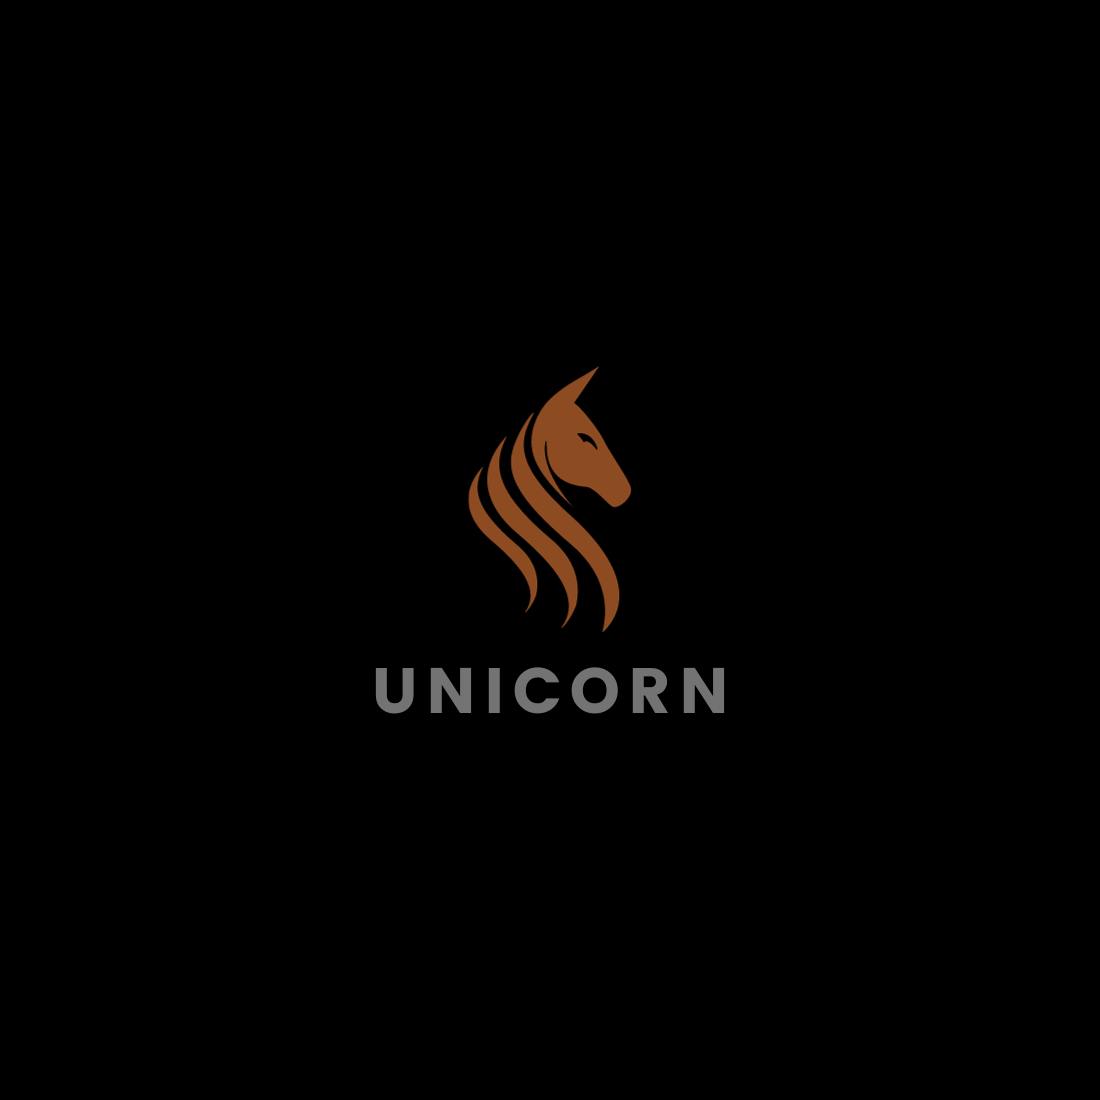 4 horse logo called unicorn preview image.